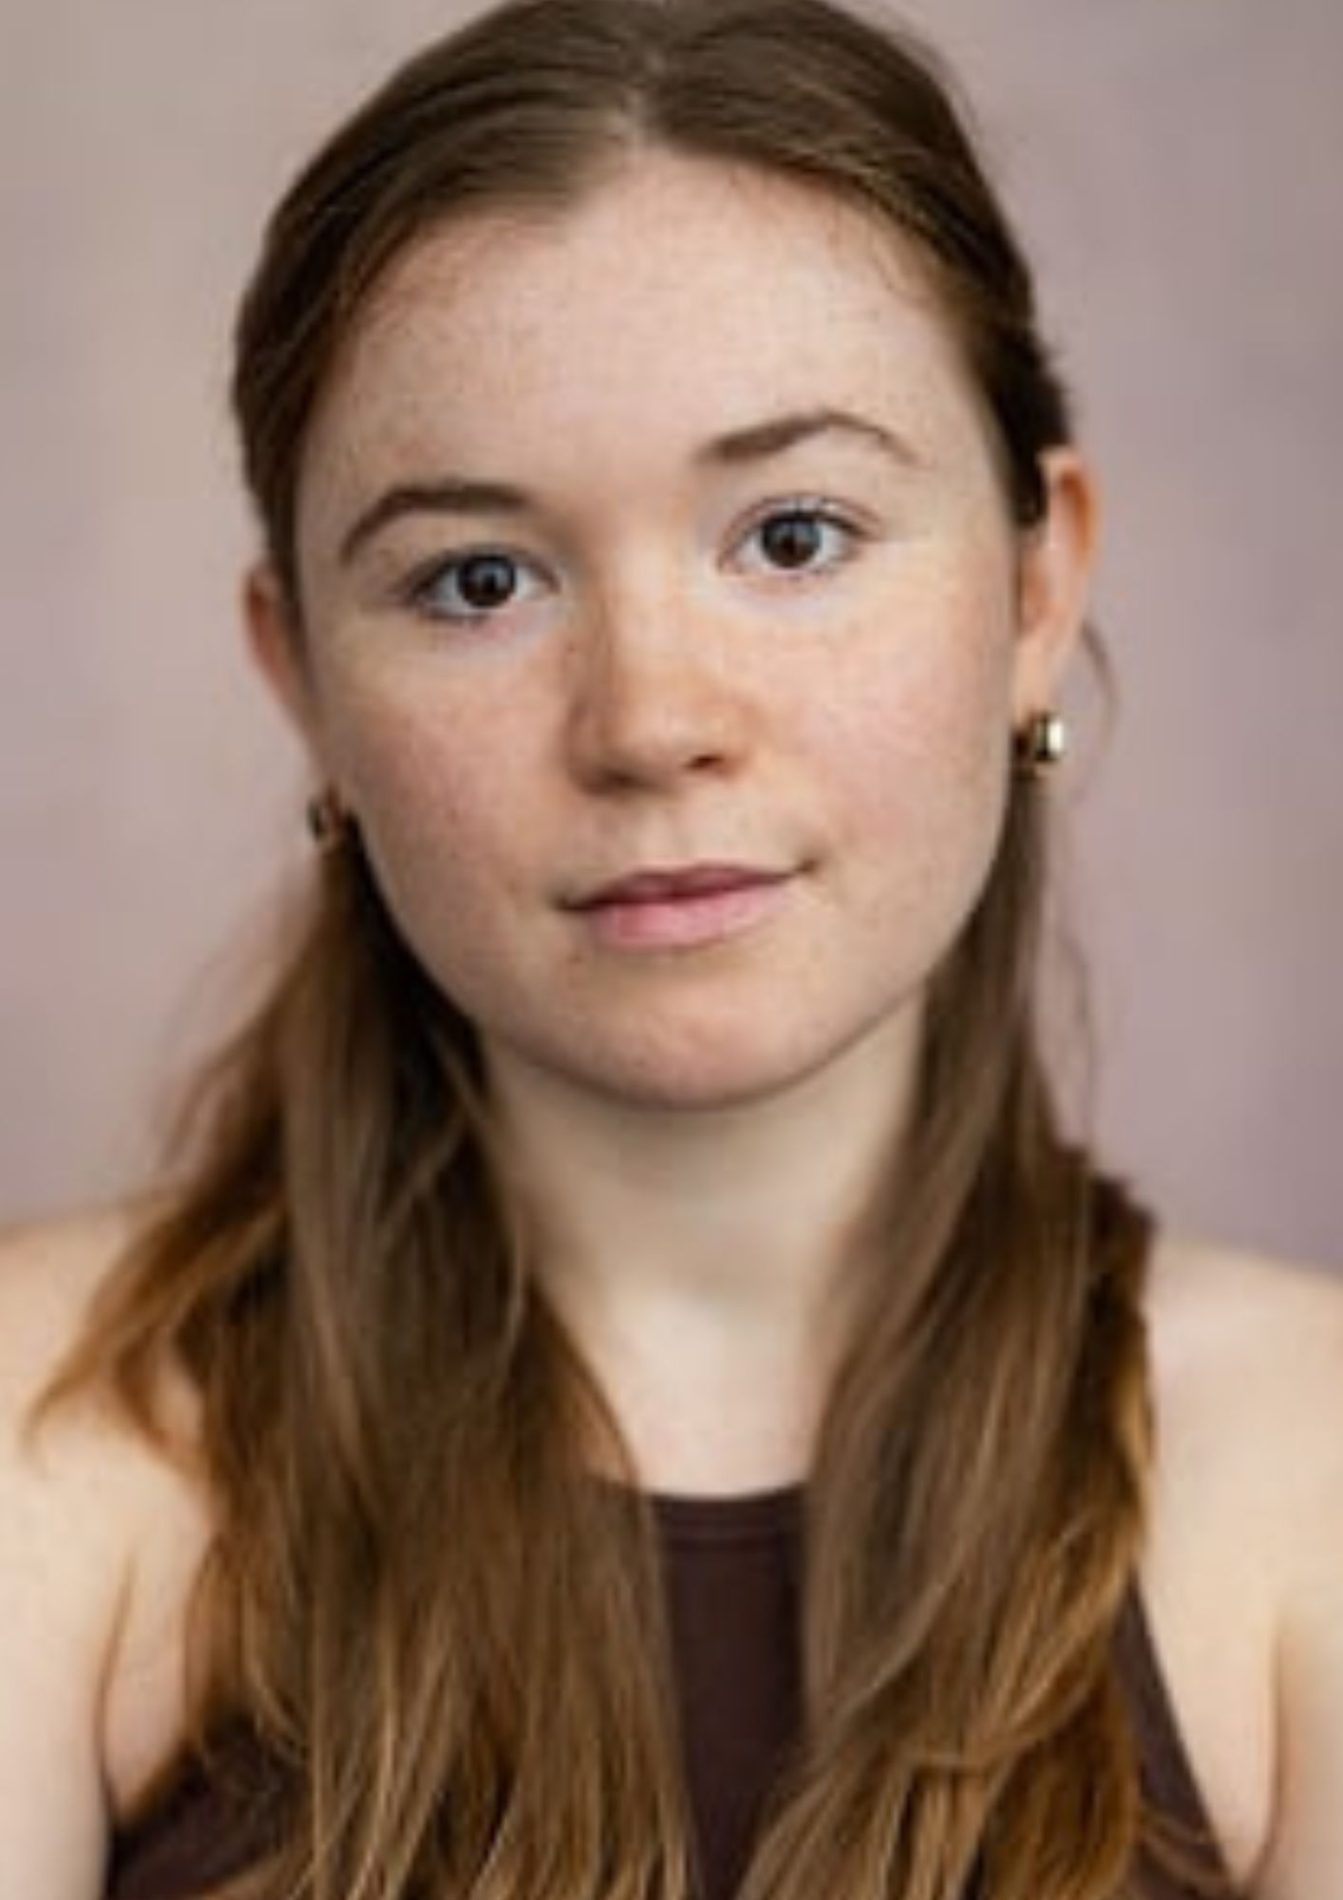 Madeleine Gray's headshot: She has reddish-brown hair that is partially pulled back. She has brown eyes, freckles, and wears a black tank top.